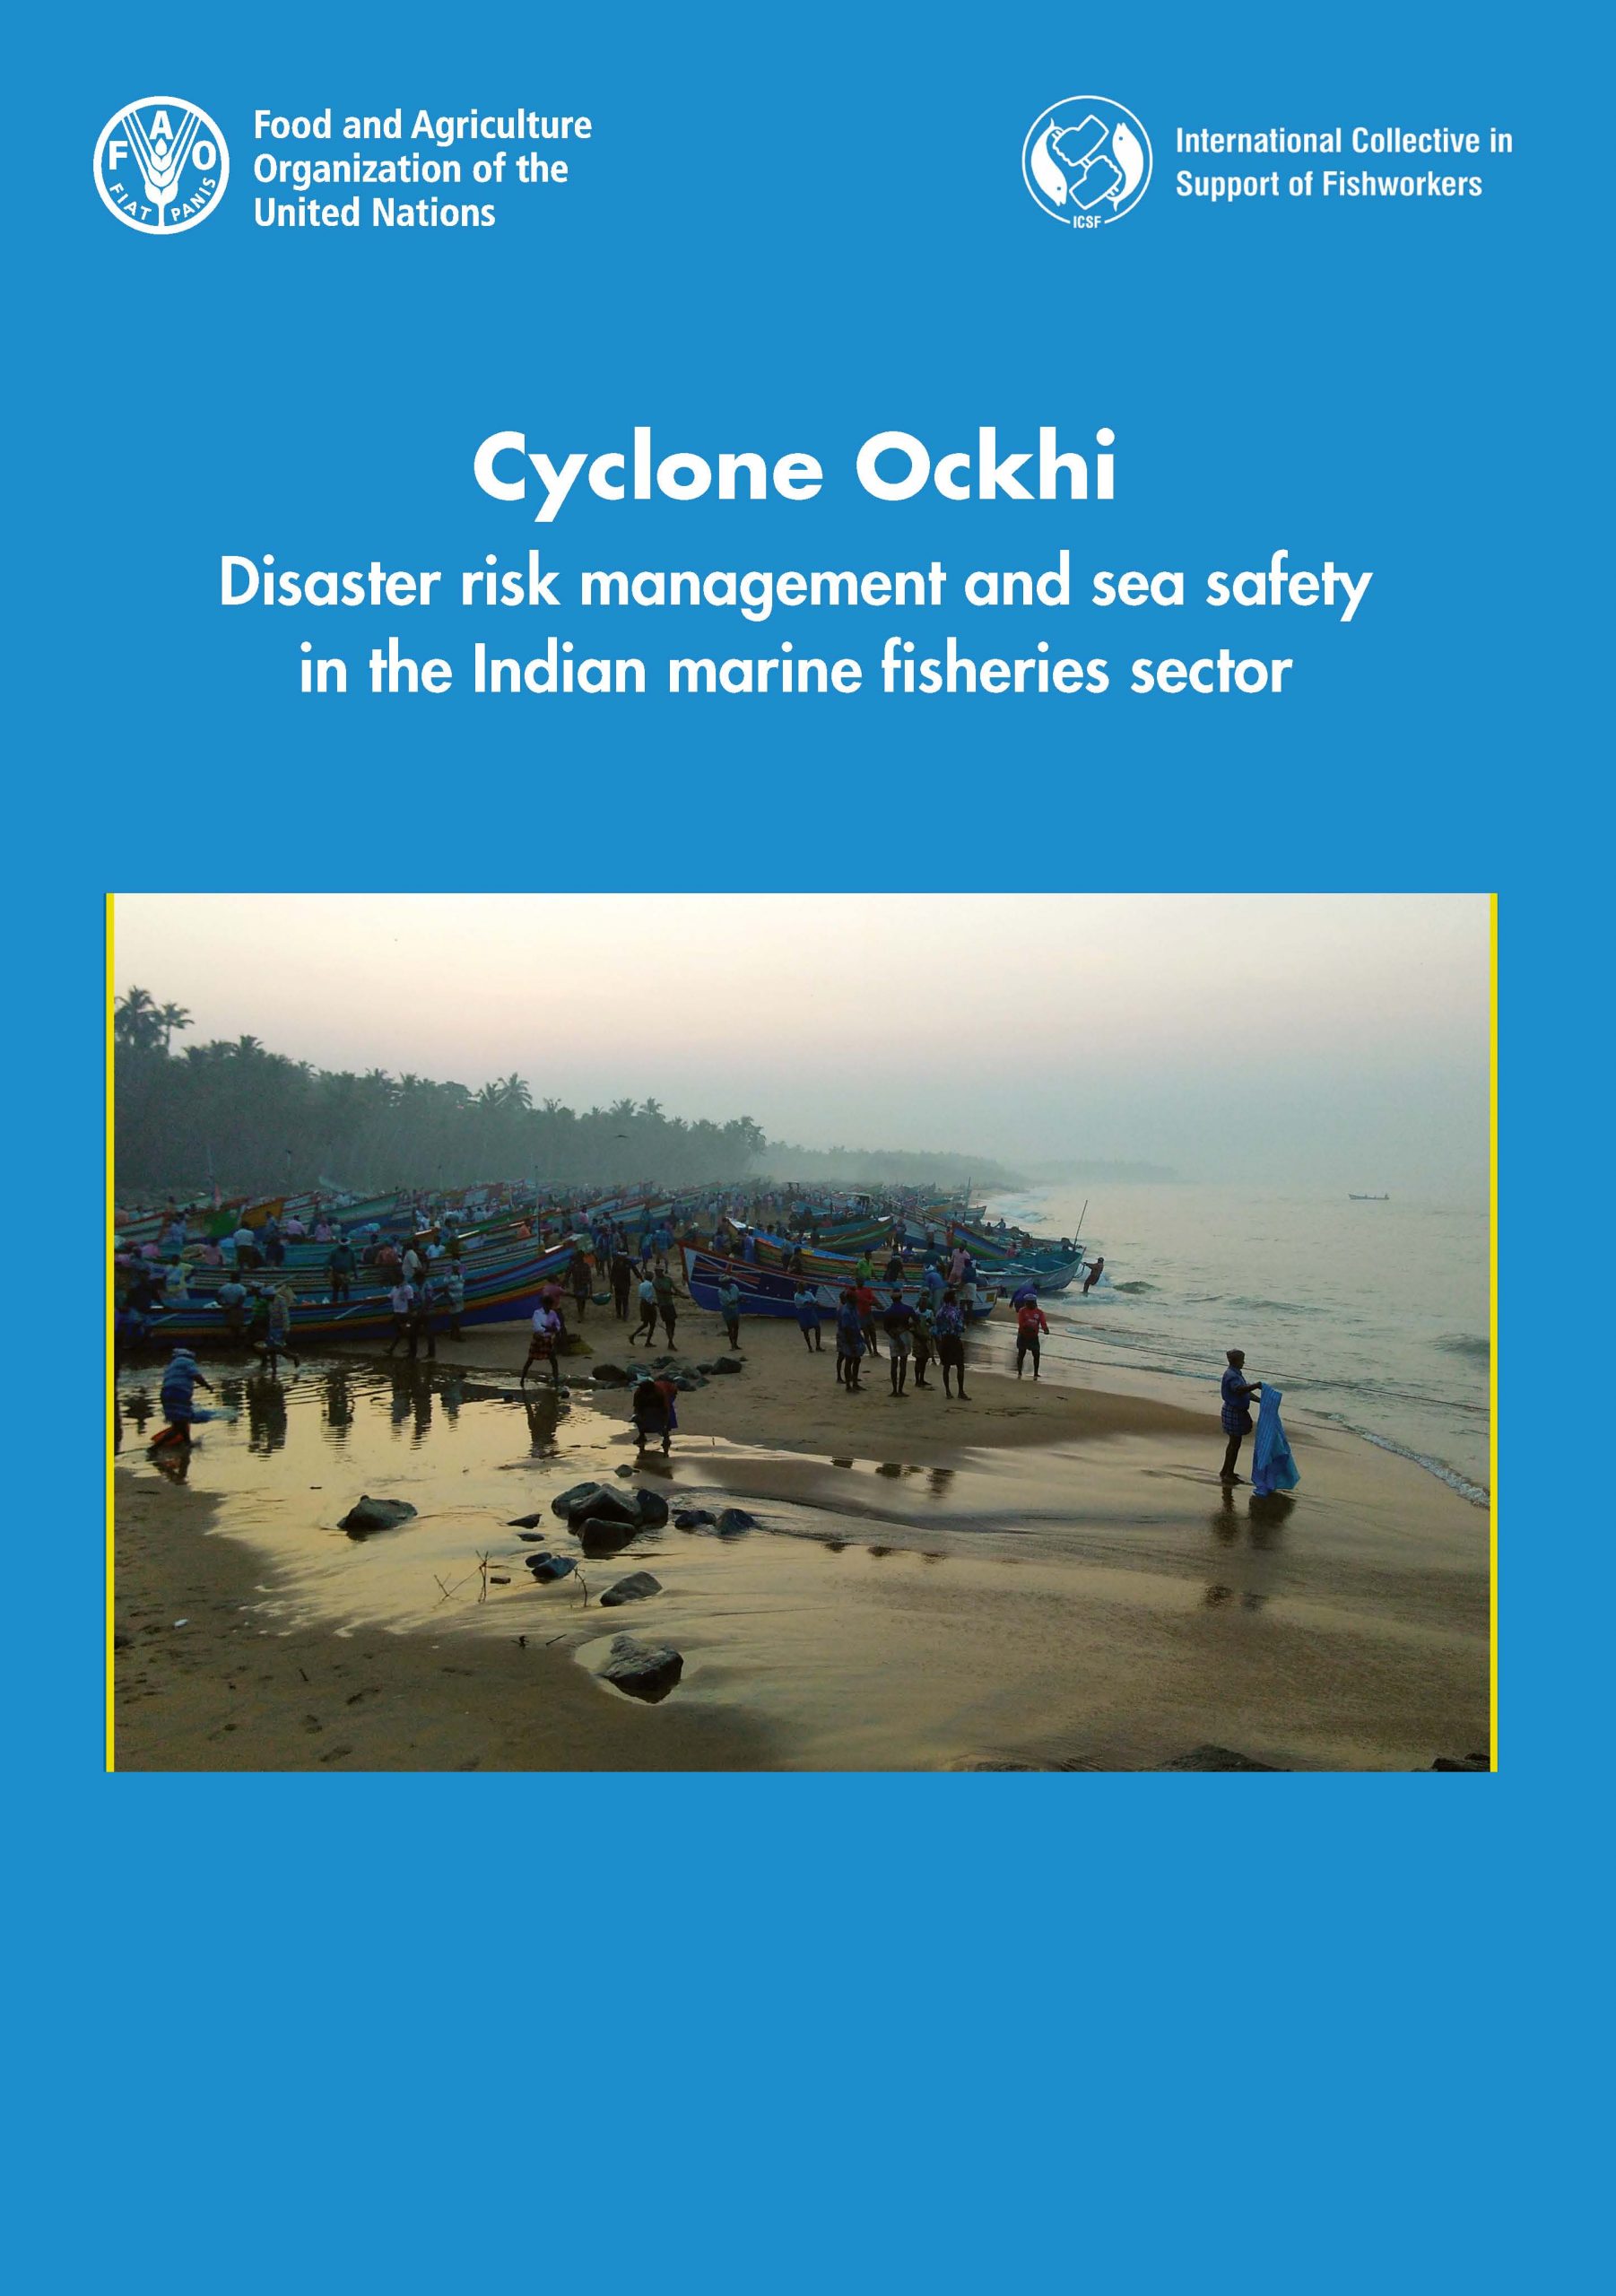 Study on Cyclone Ockhi: Disaster Risk Management and Sea Safety in the Indian Marine Fisheries Sector